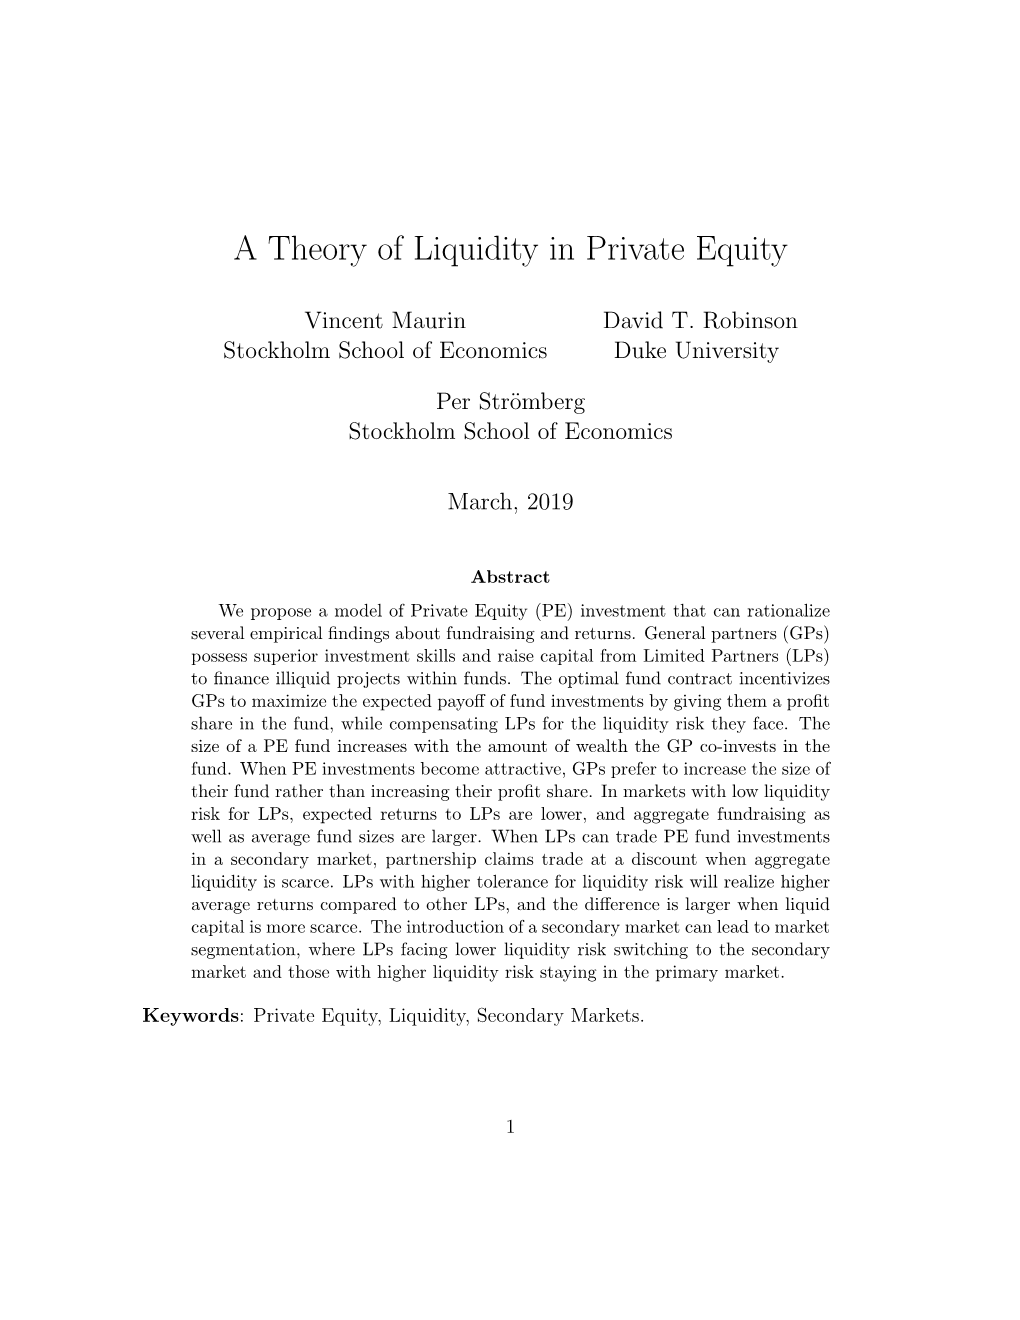 A Theory of Liquidity in Private Equity